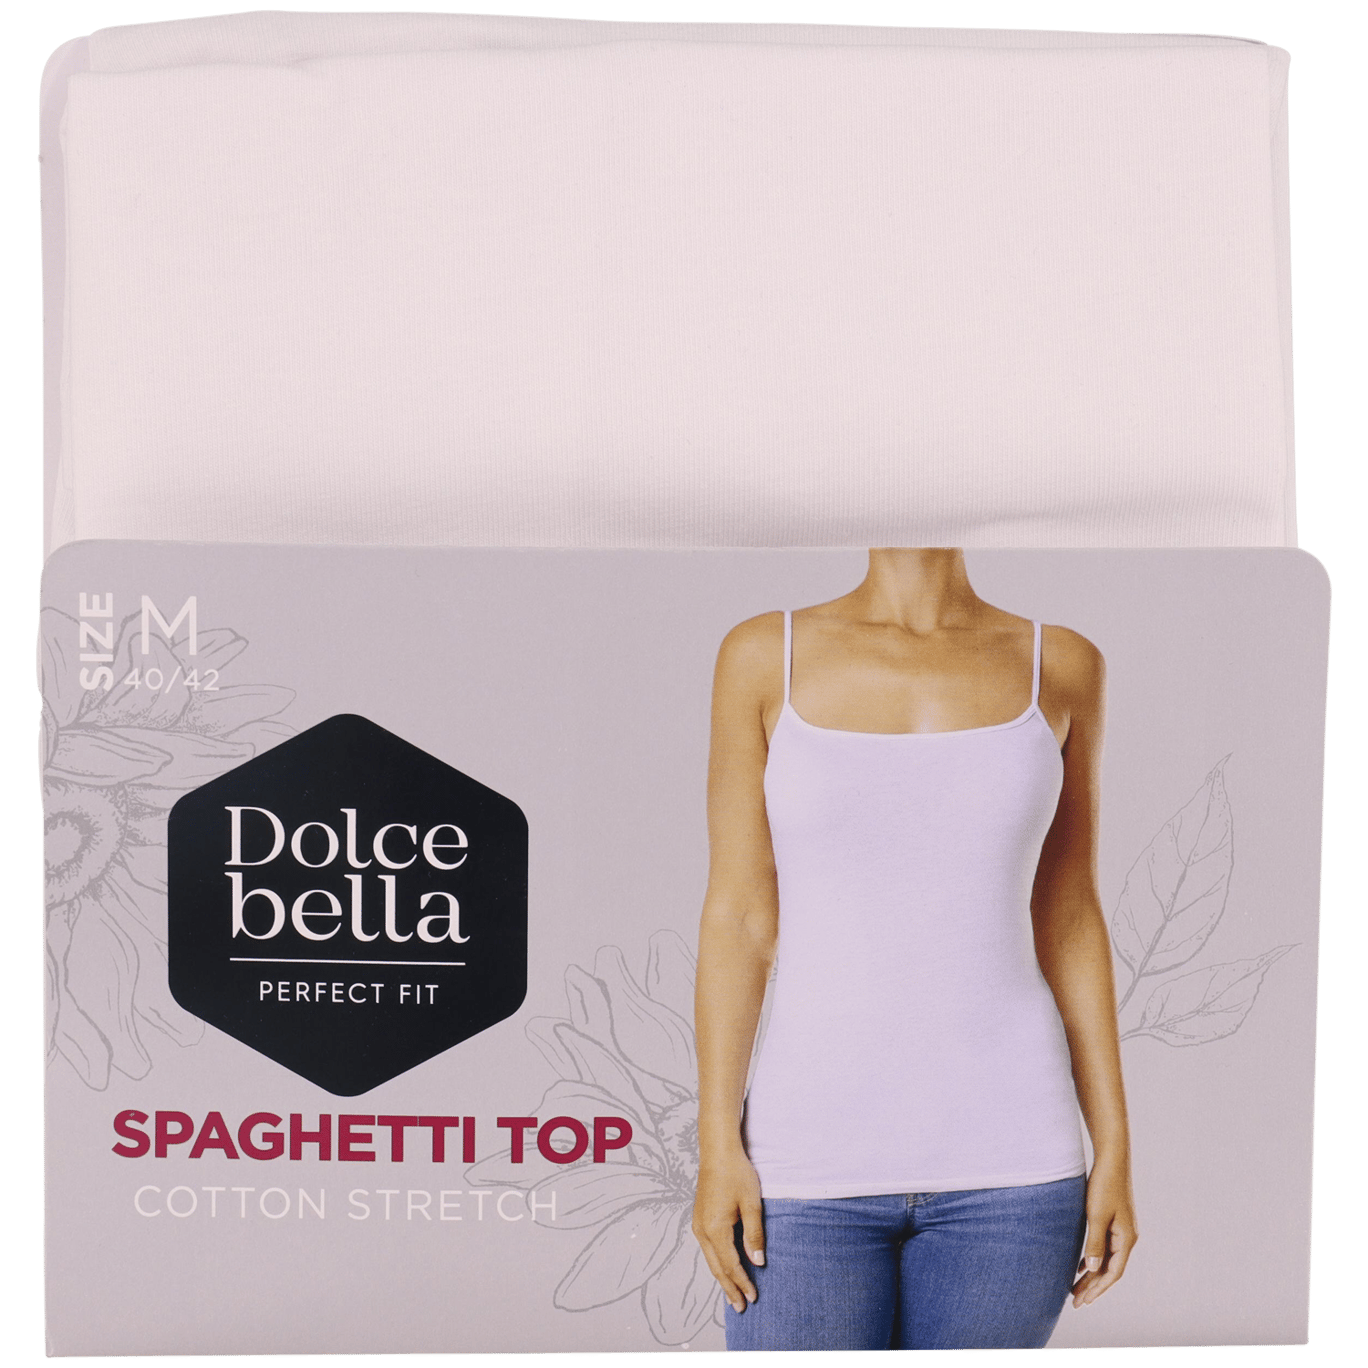 Dolce spaghetti-top Action.com